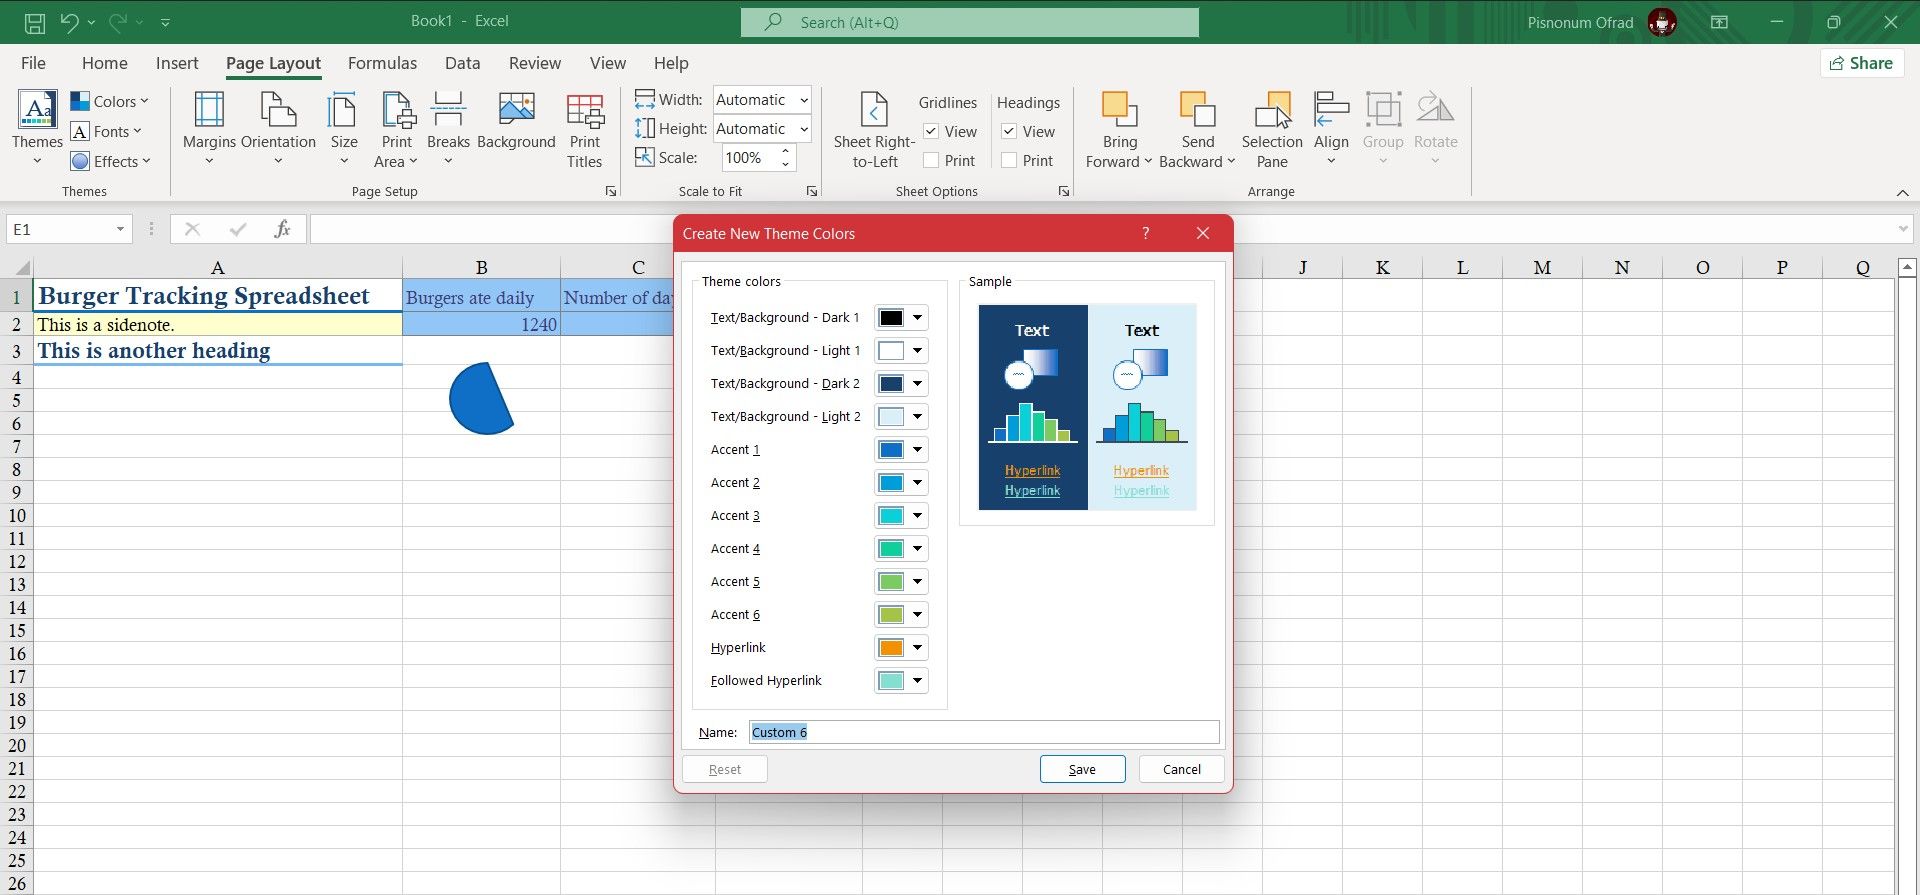 Customizing theme colors in Excel